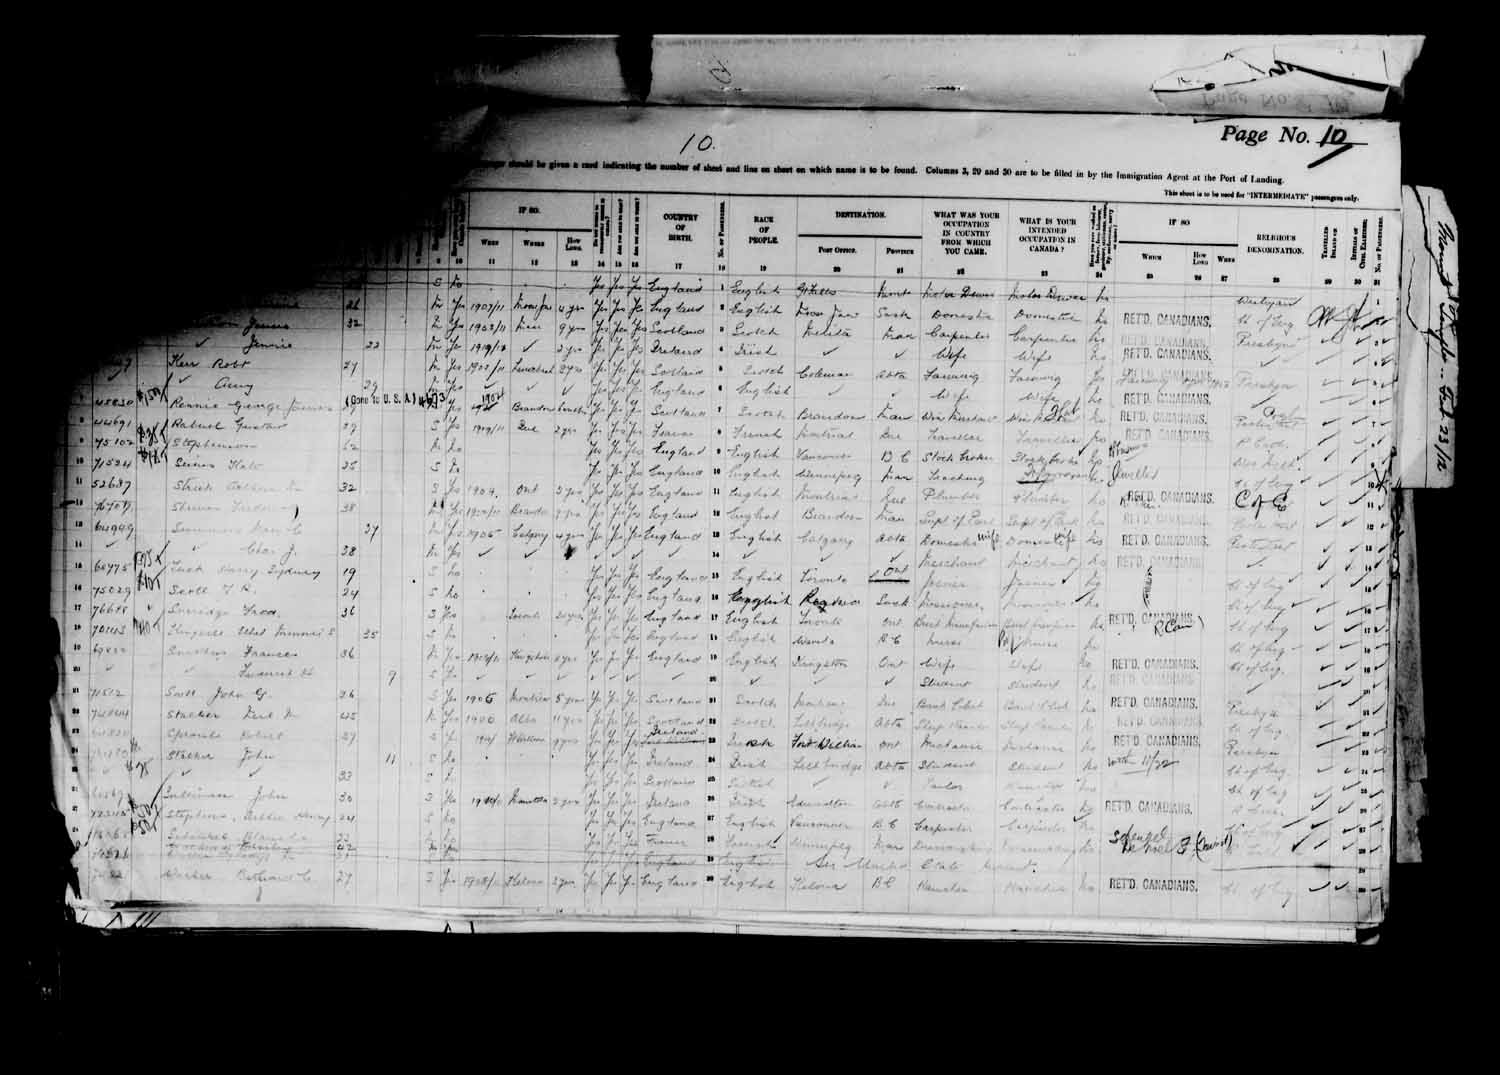 Digitized page of Passenger Lists for Image No.: e003627183